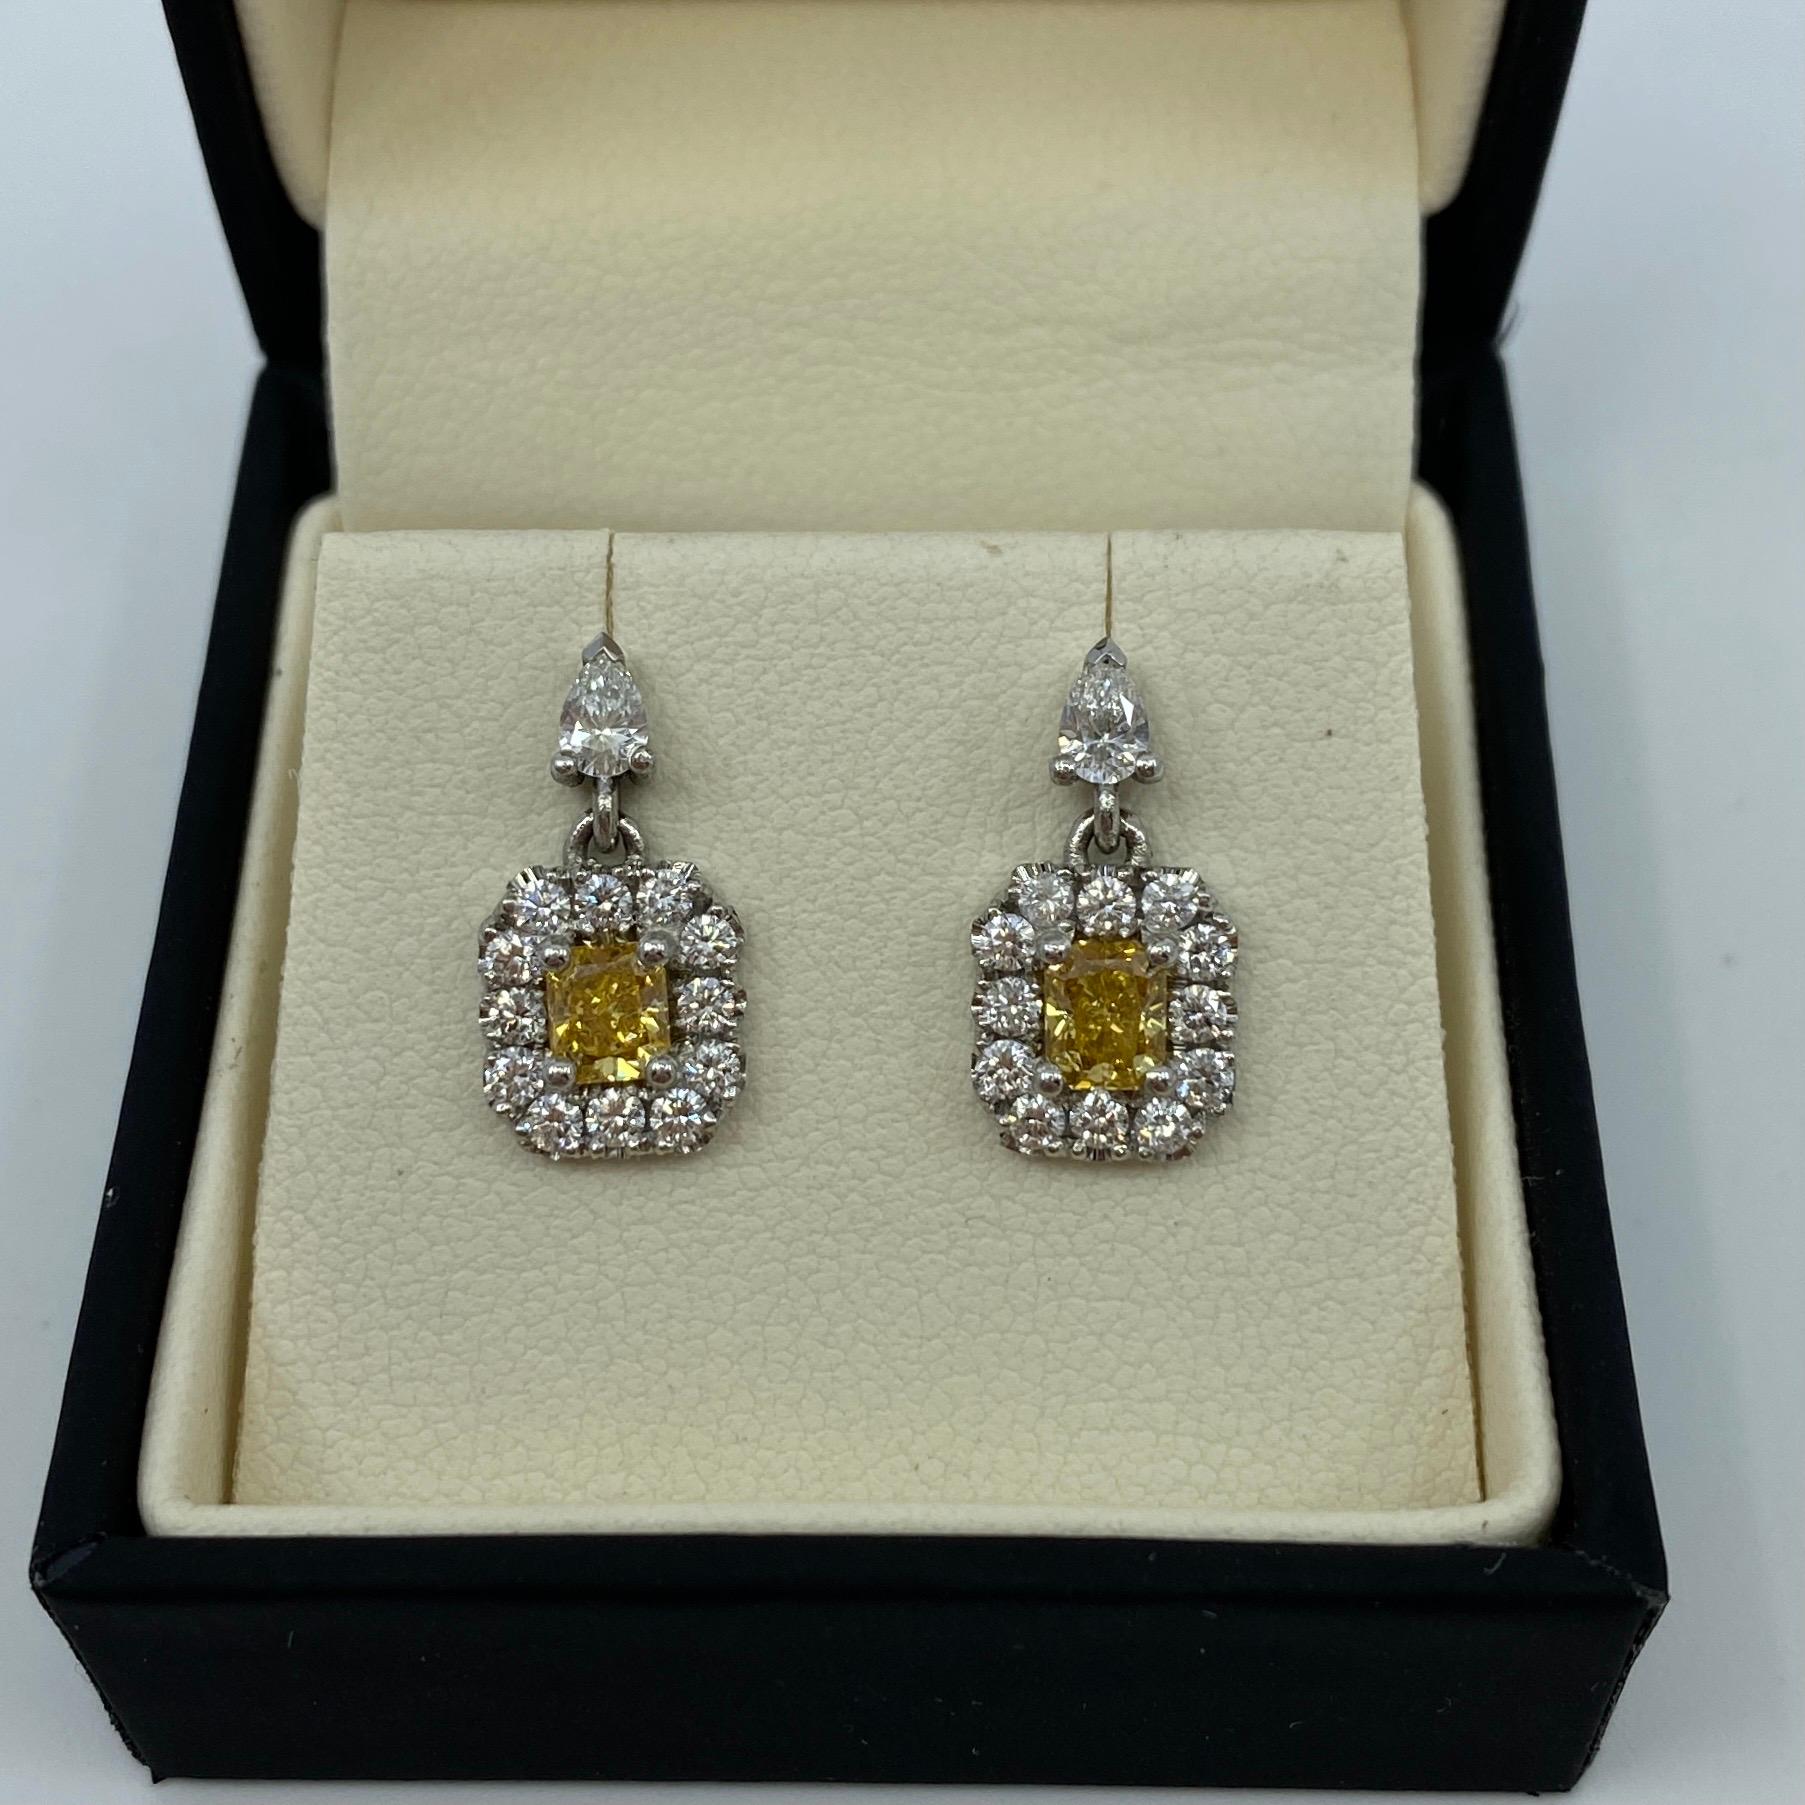 1.62 Total carat GIA Certified Untreated Fancy Intense Yellow Orange Diamond Platinum Halo Earrings.

Fine untreated diamonds with intense orange-yellow colour and an excellent cushion cut. Certified by GIA. 0.69 total carat, these fancy diamonds